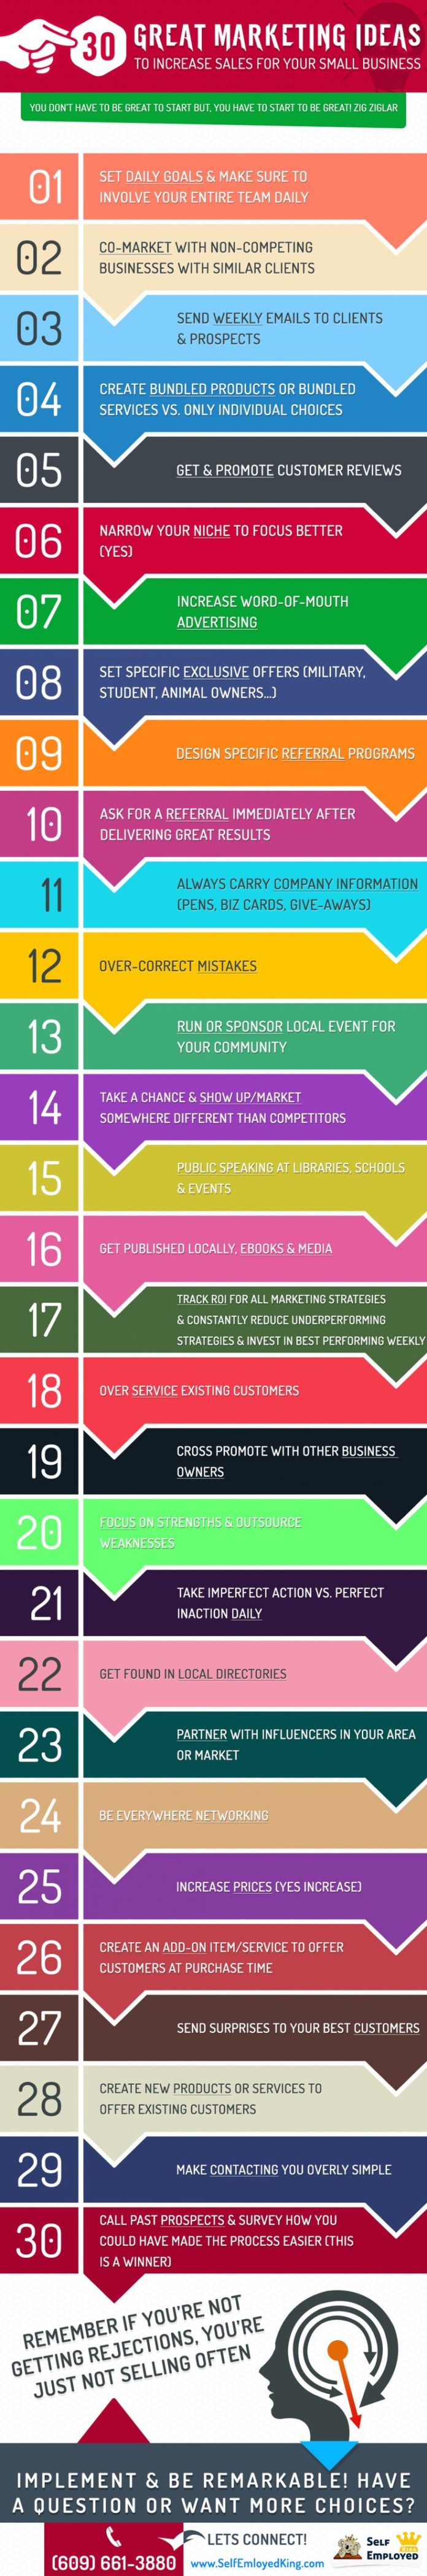 Business infographic : 30 Great Marketing Ideas for Small Business ...